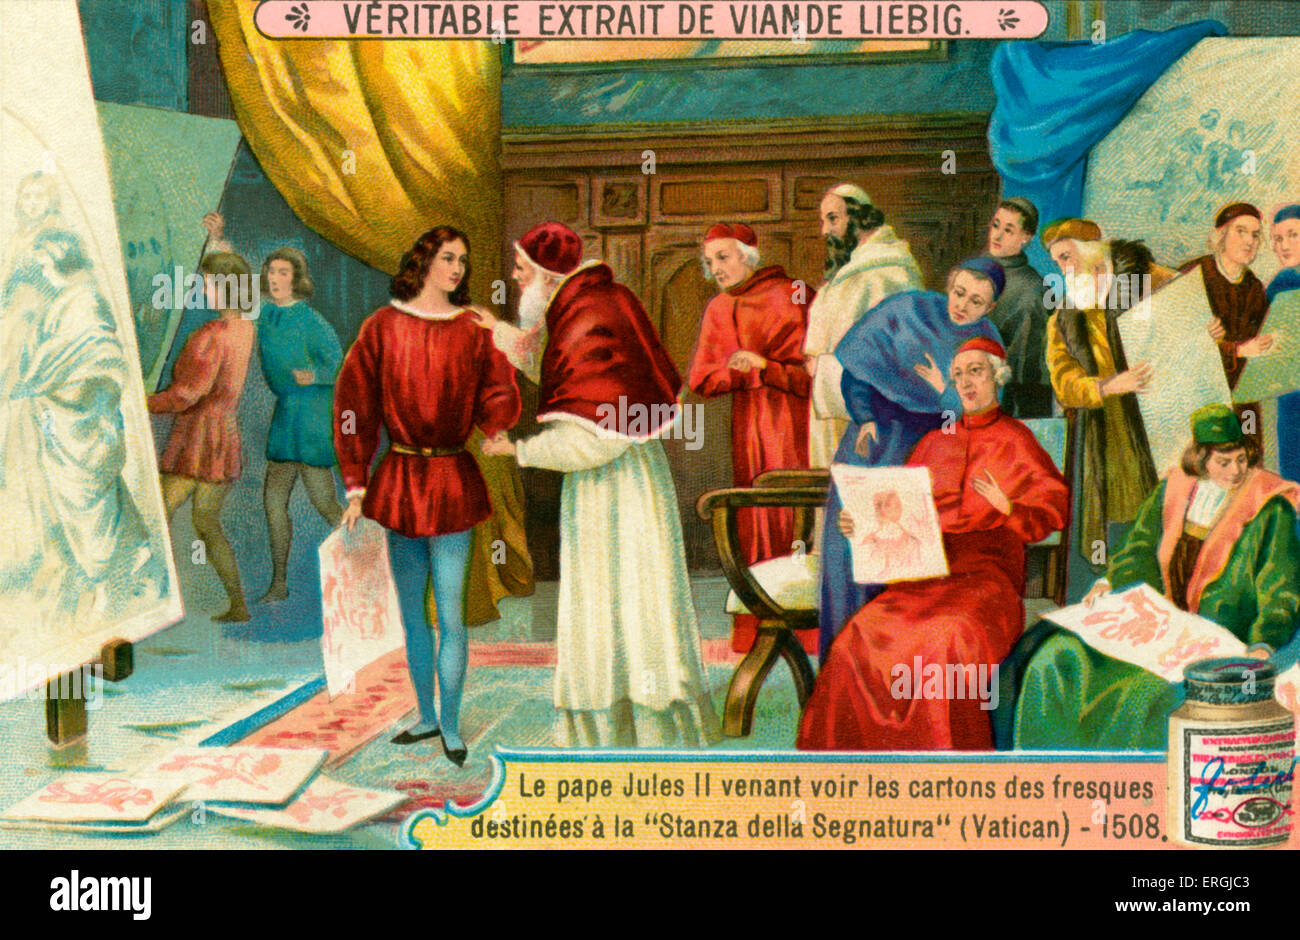 Pope Julius II examining paintings produced for 'Stanza della Segnatura' in the Palace of the Vatican, 1508. One of four 'stanze di Raffaello' (Raphael's rooms) decorated with frescos by Raphael. Illustration of an episode from the life of Italian painter Raphael (Sanzio da Urbino) (1483 – 1520) . Liebig card, early 20th century. Stock Photo